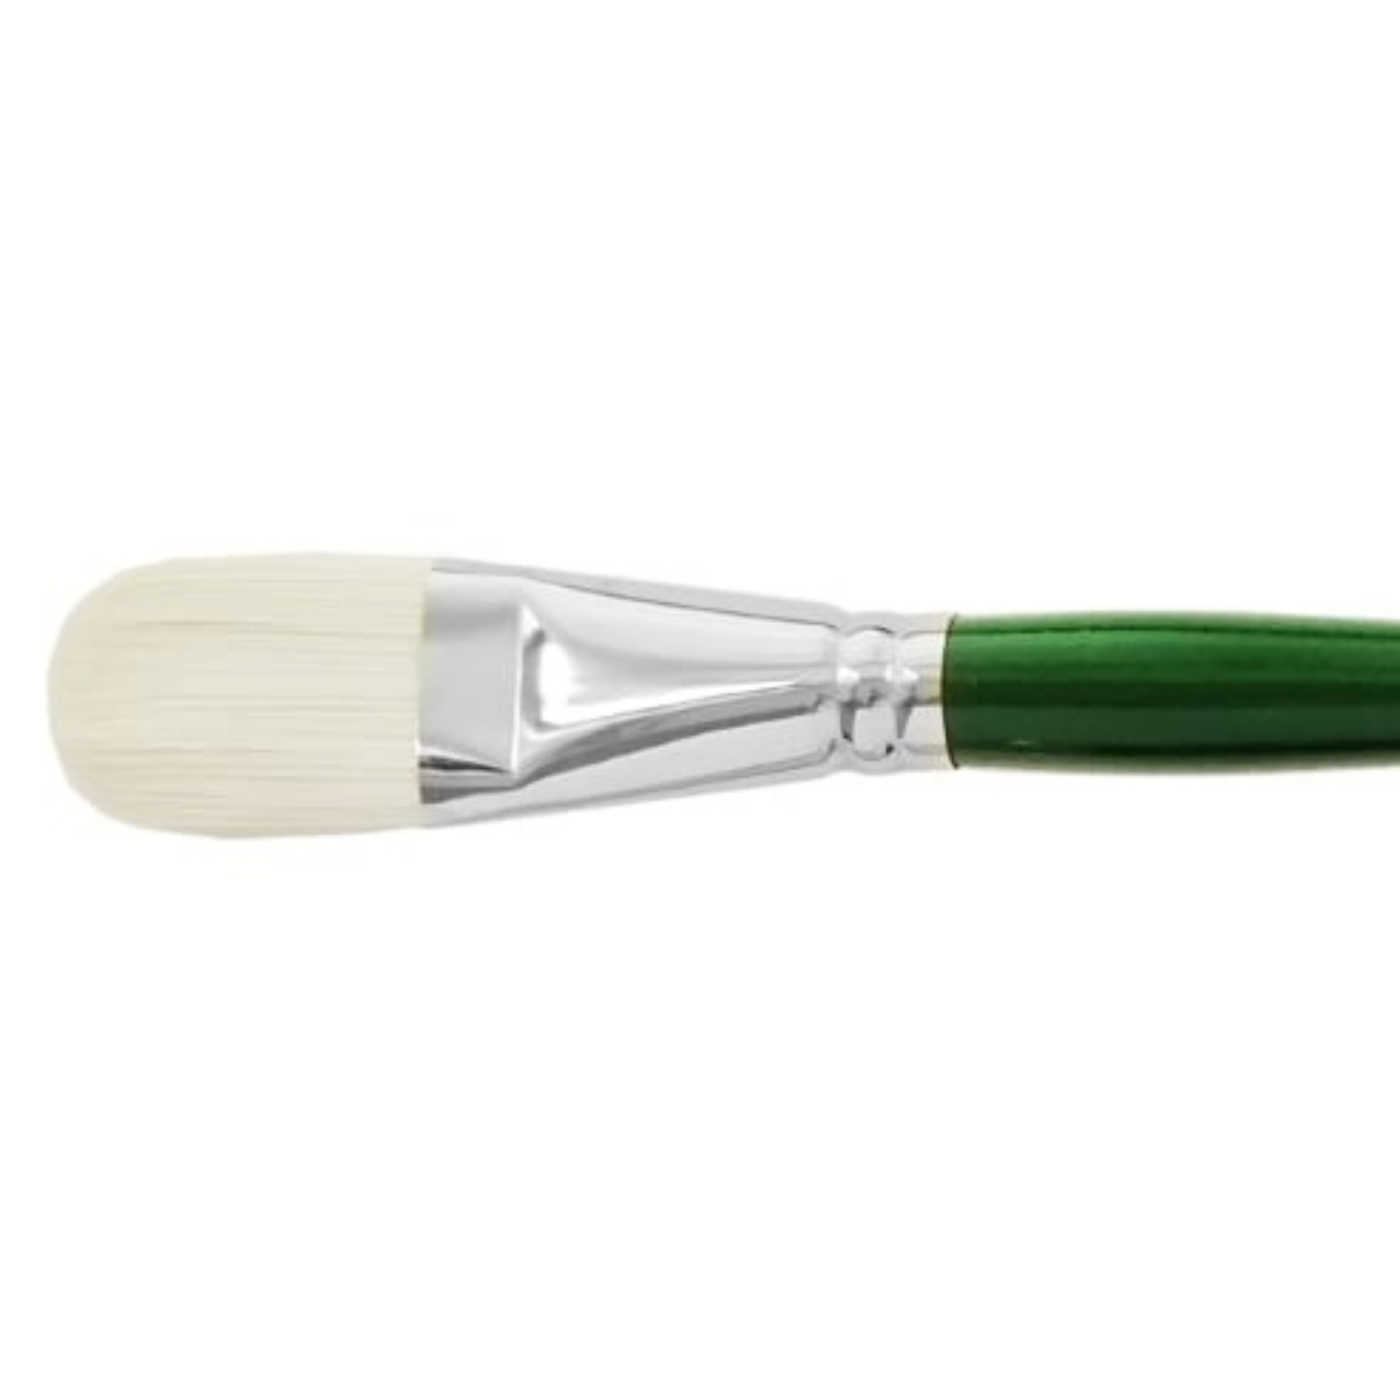 Princeton Artist Brush Co. Aspen Series 6500 Travel Brush Set - 4 Synthetic  Oil and Acrylic Paint Brushes and Case for Artists and Students - Travel  Oil Paint Brushes for Plein Air Painting